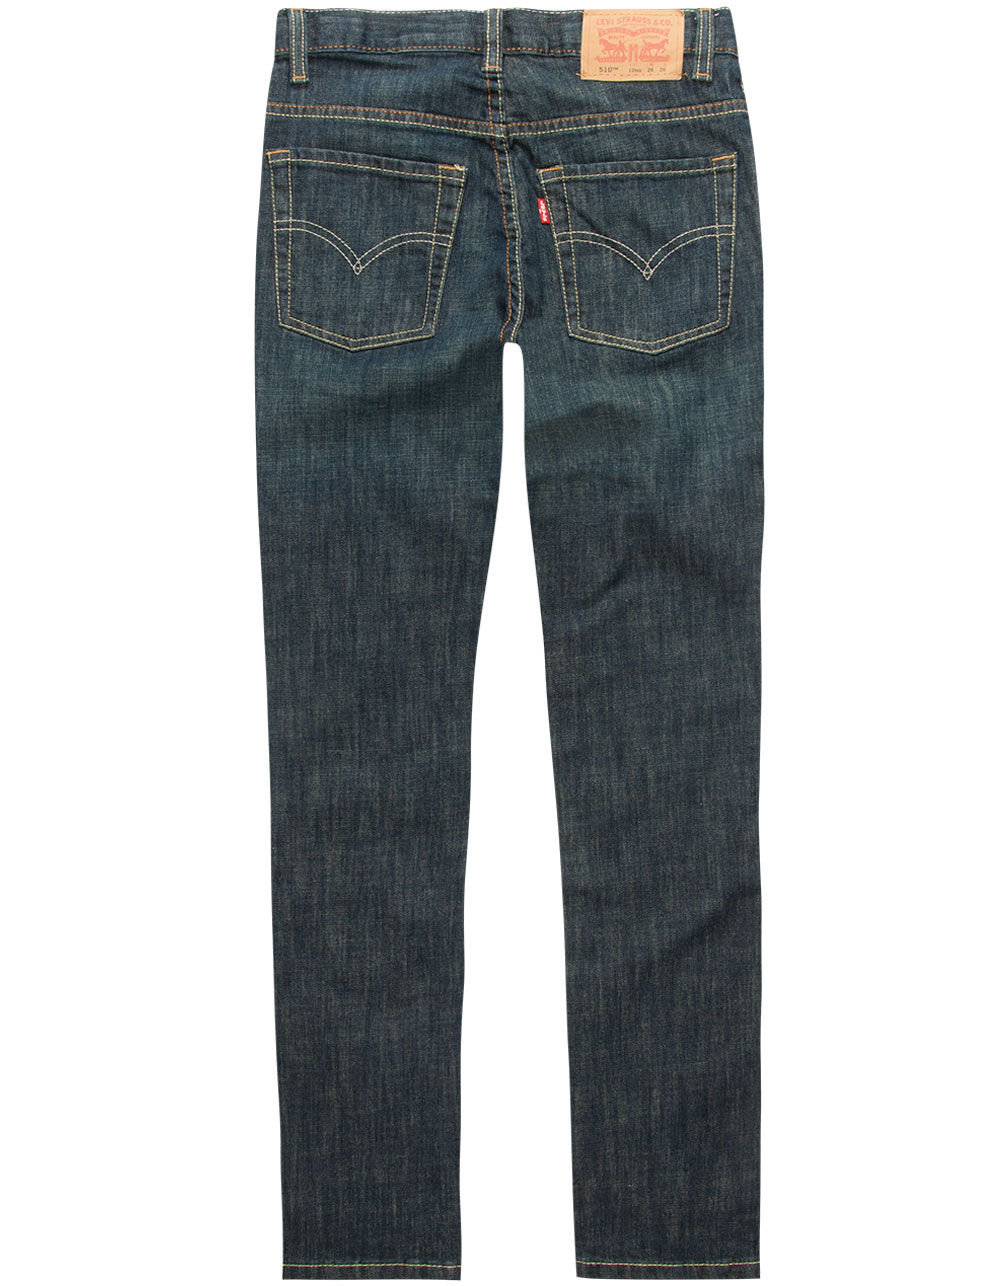 LEVI'S 510 Cover Up Boys Skinny Jeans image number 1